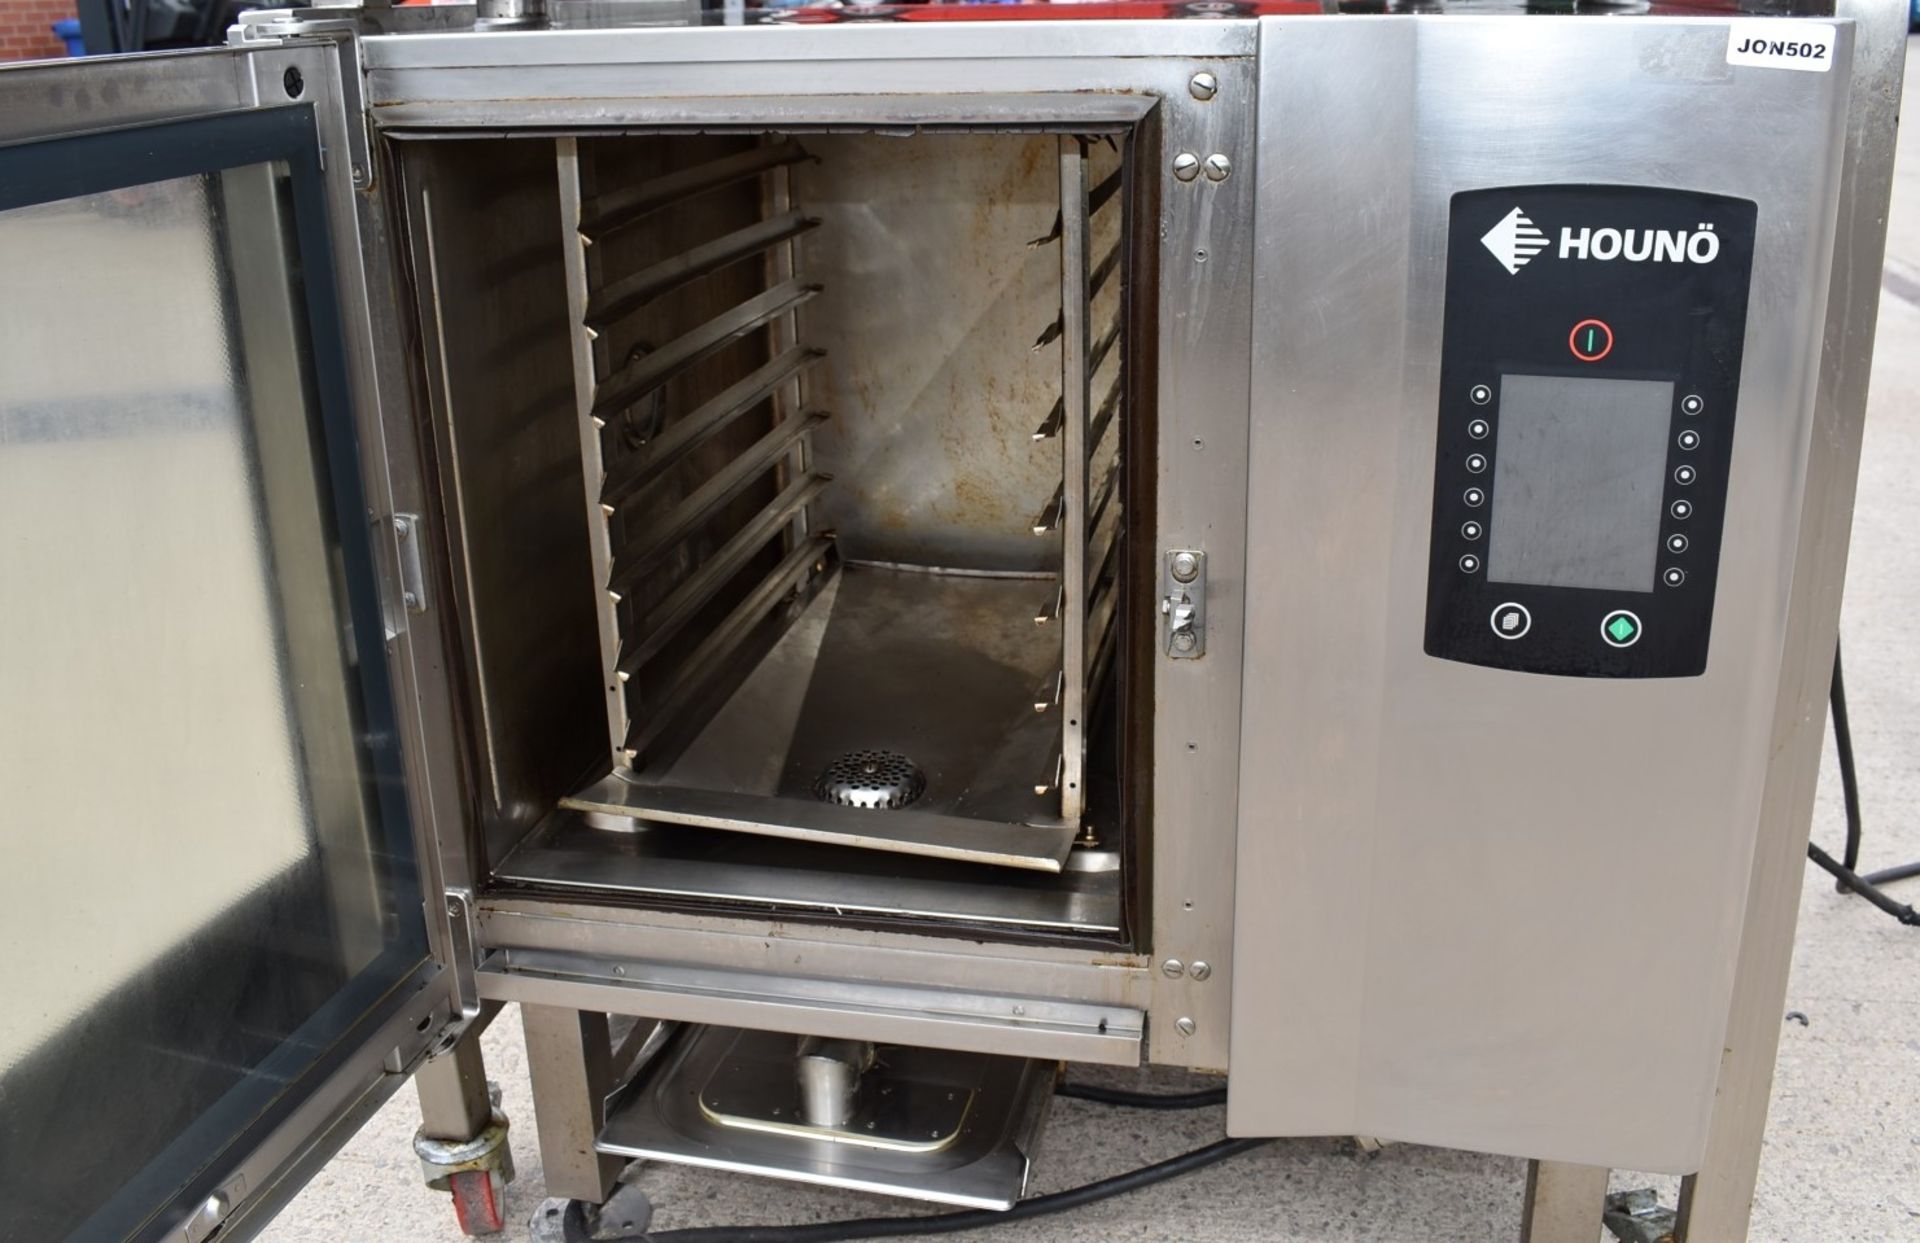 1 x Houno Electric Combi Oven and Fri-jado Rotisserie Oven Combo With Stand - 3 Phase - Image 18 of 22